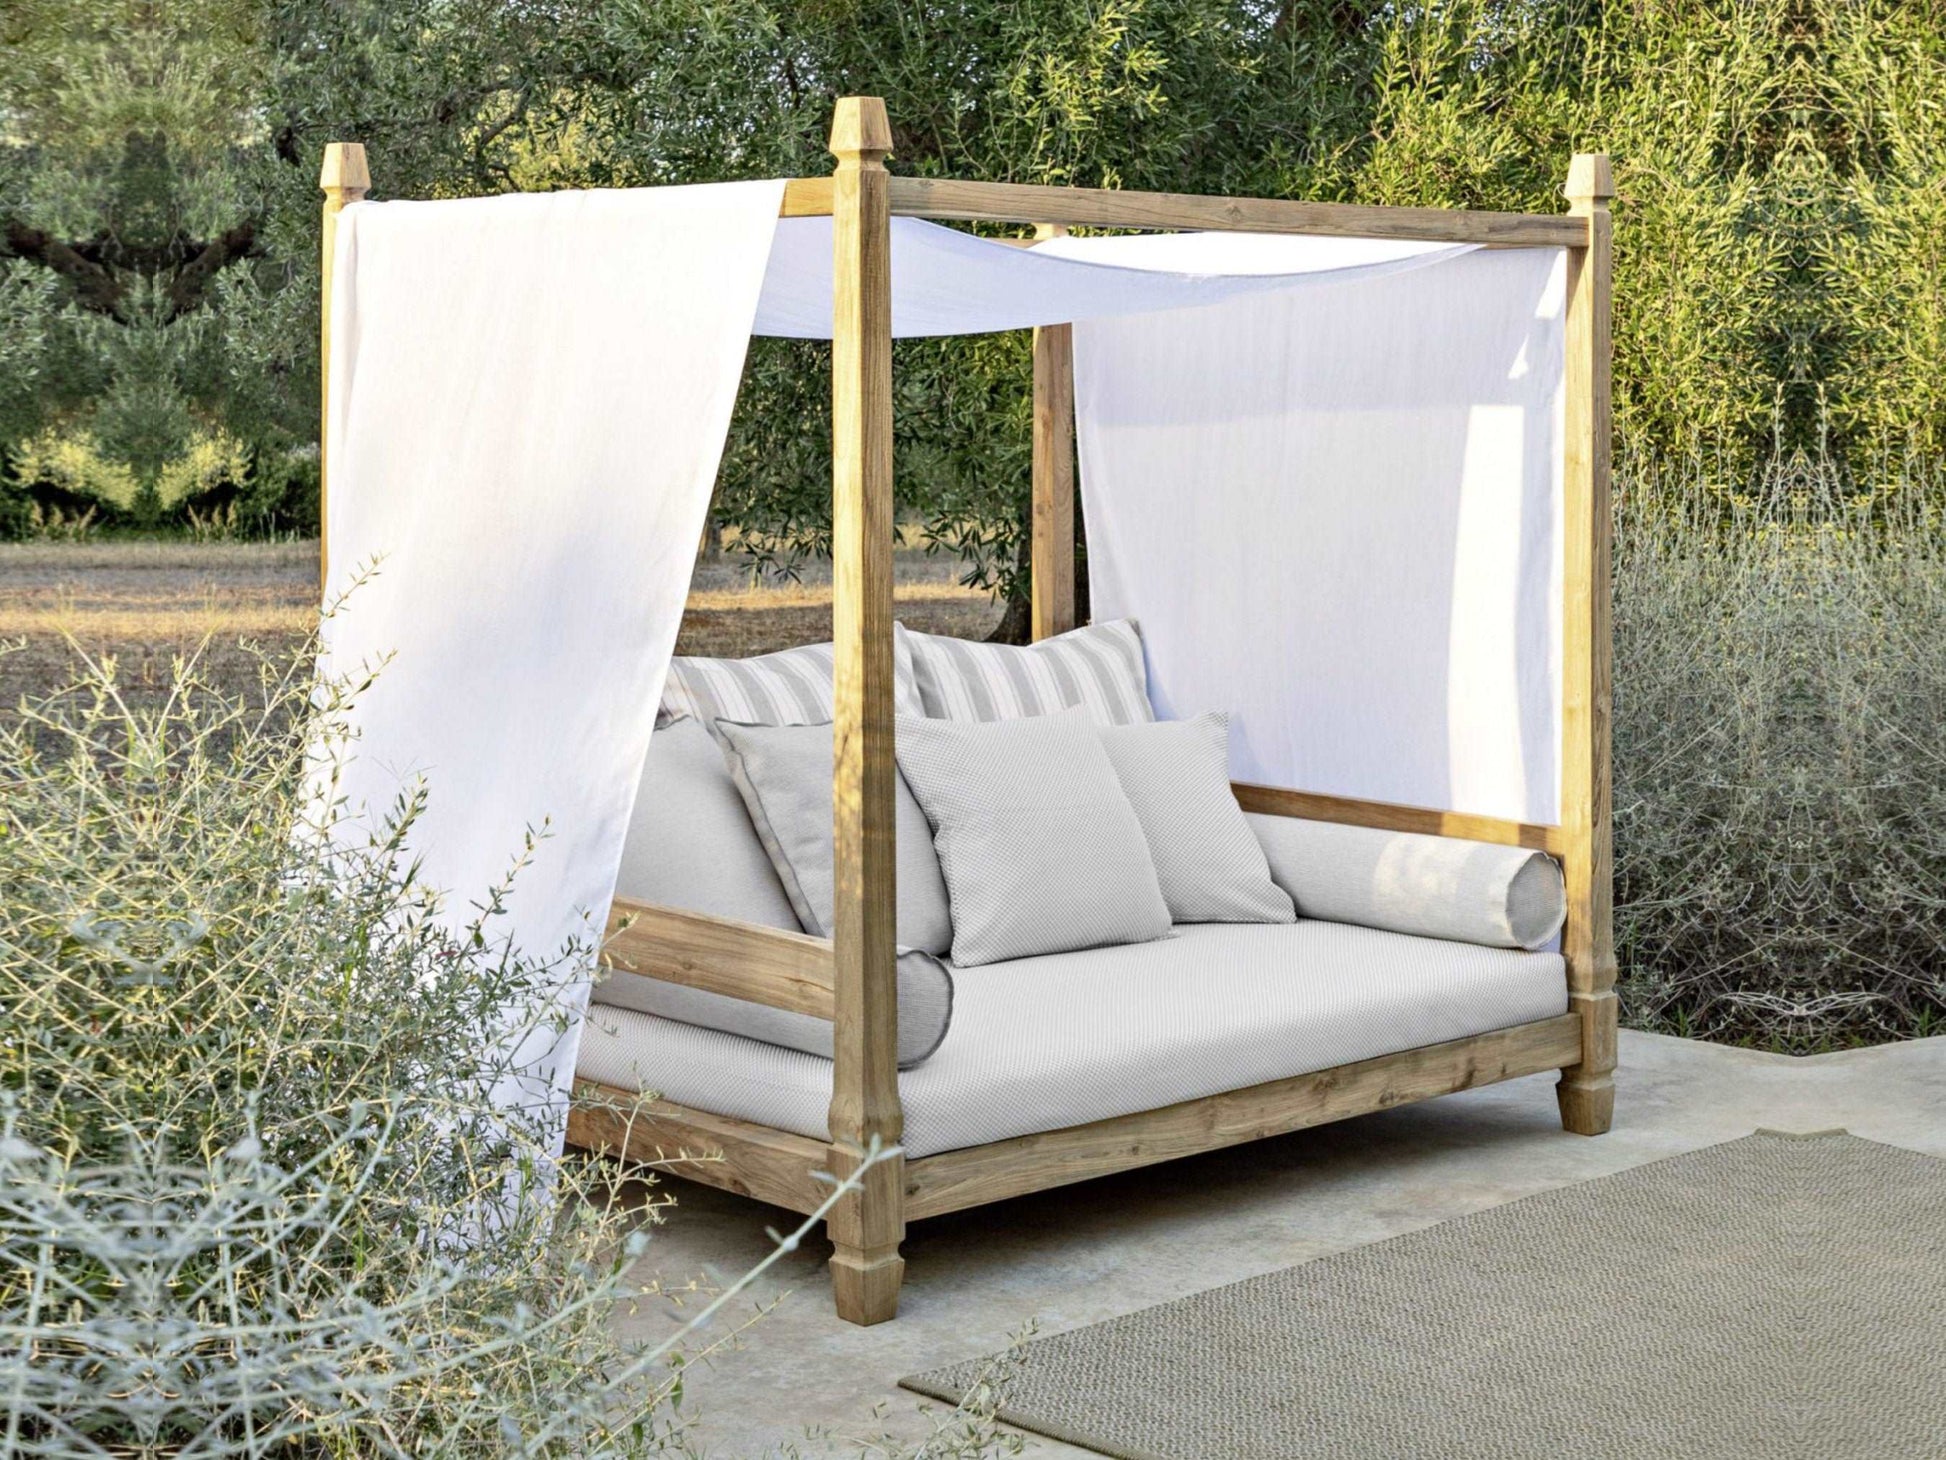 DIY plans for garden furniture - How to build an Outdoor cabana lounge - Build plans for Cabana